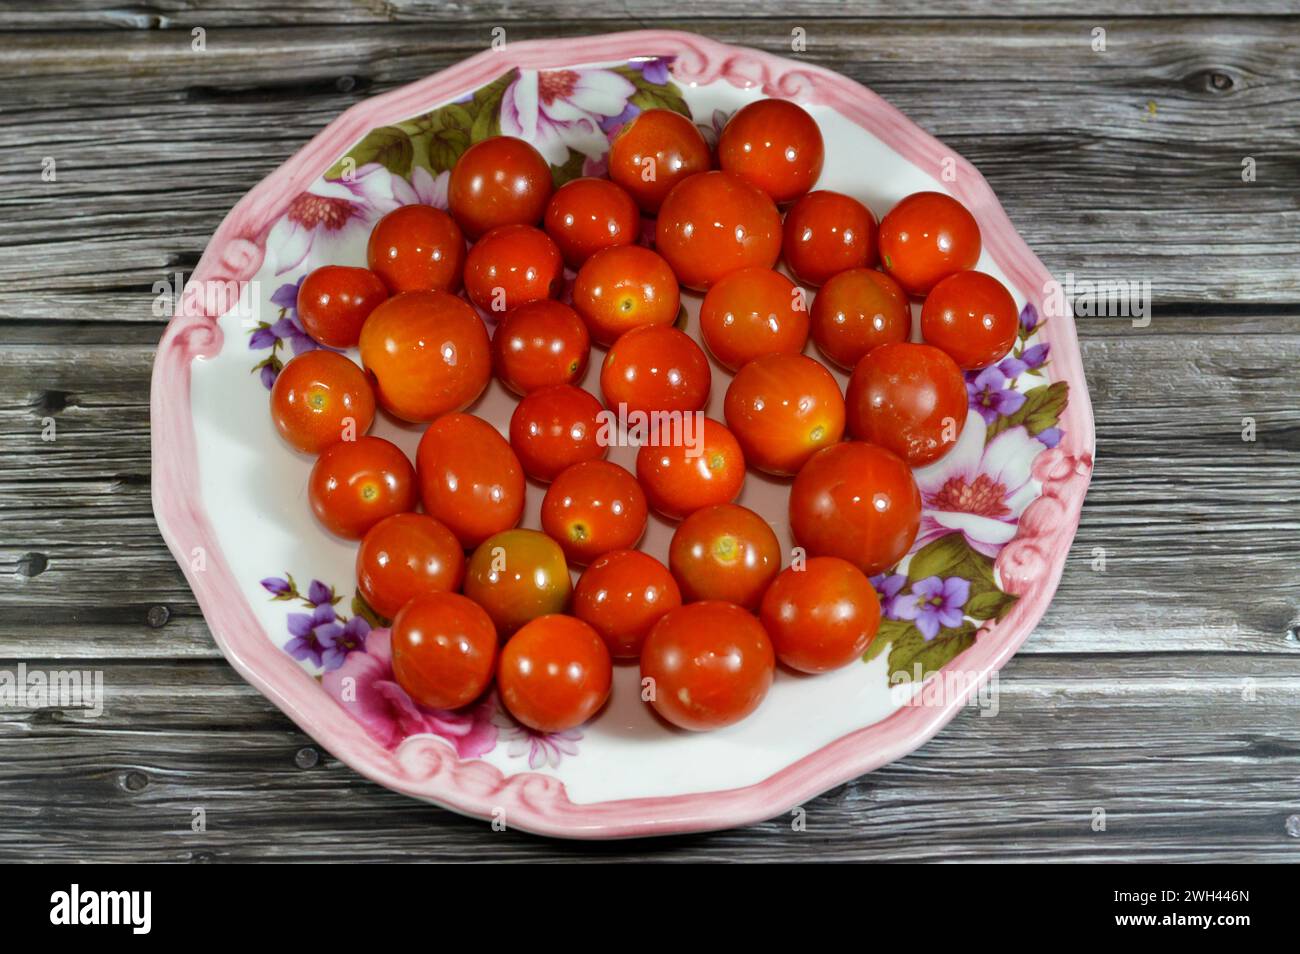 The cherry tomato, a type of small round tomato believed to be an intermediate genetic admixture between wild currant-type tomatoes and domesticated g Stock Photo